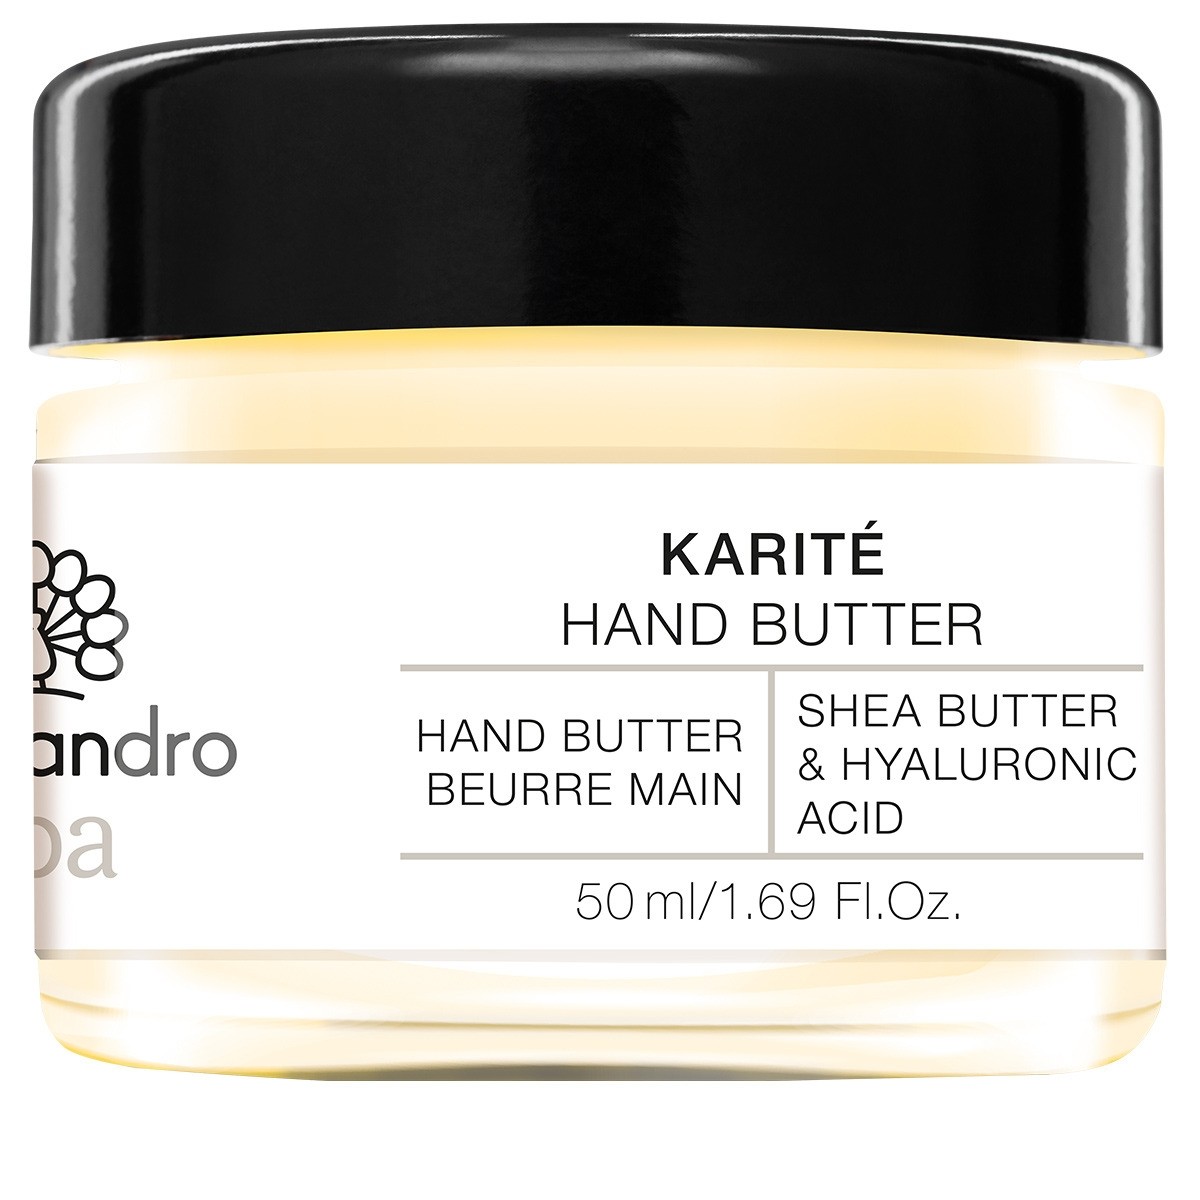 Image of Alessandro Spa KARITÉ HAND BUTTER (50ml)